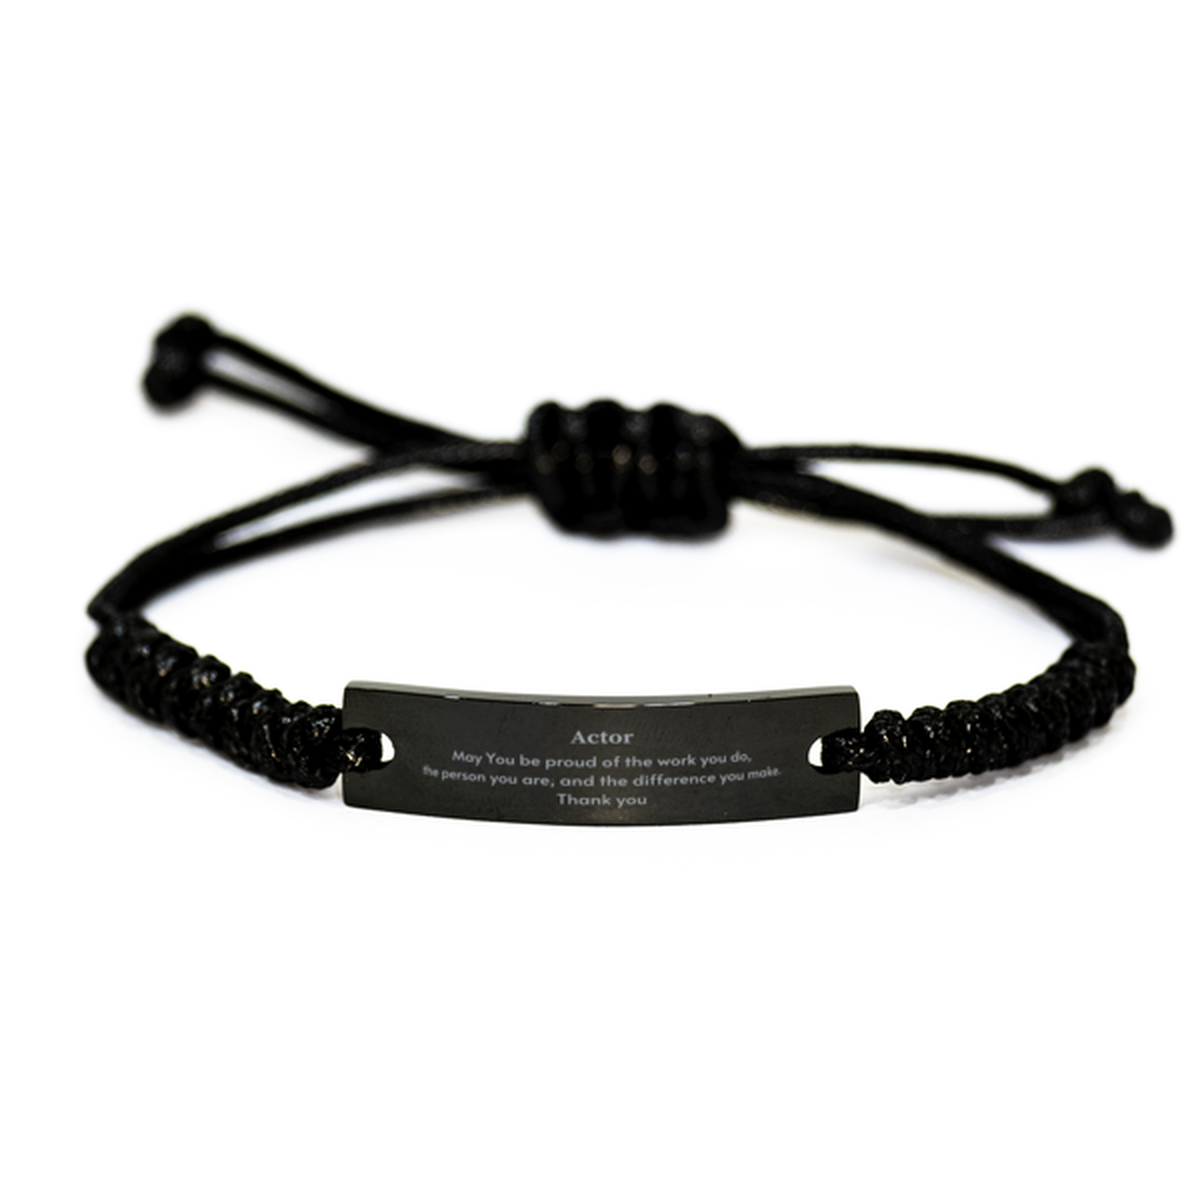 Heartwarming Black Rope Bracelet Retirement Coworkers Gifts for Actor, Actor May You be proud of the work you do, the person you are Gifts for Boss Men Women Friends